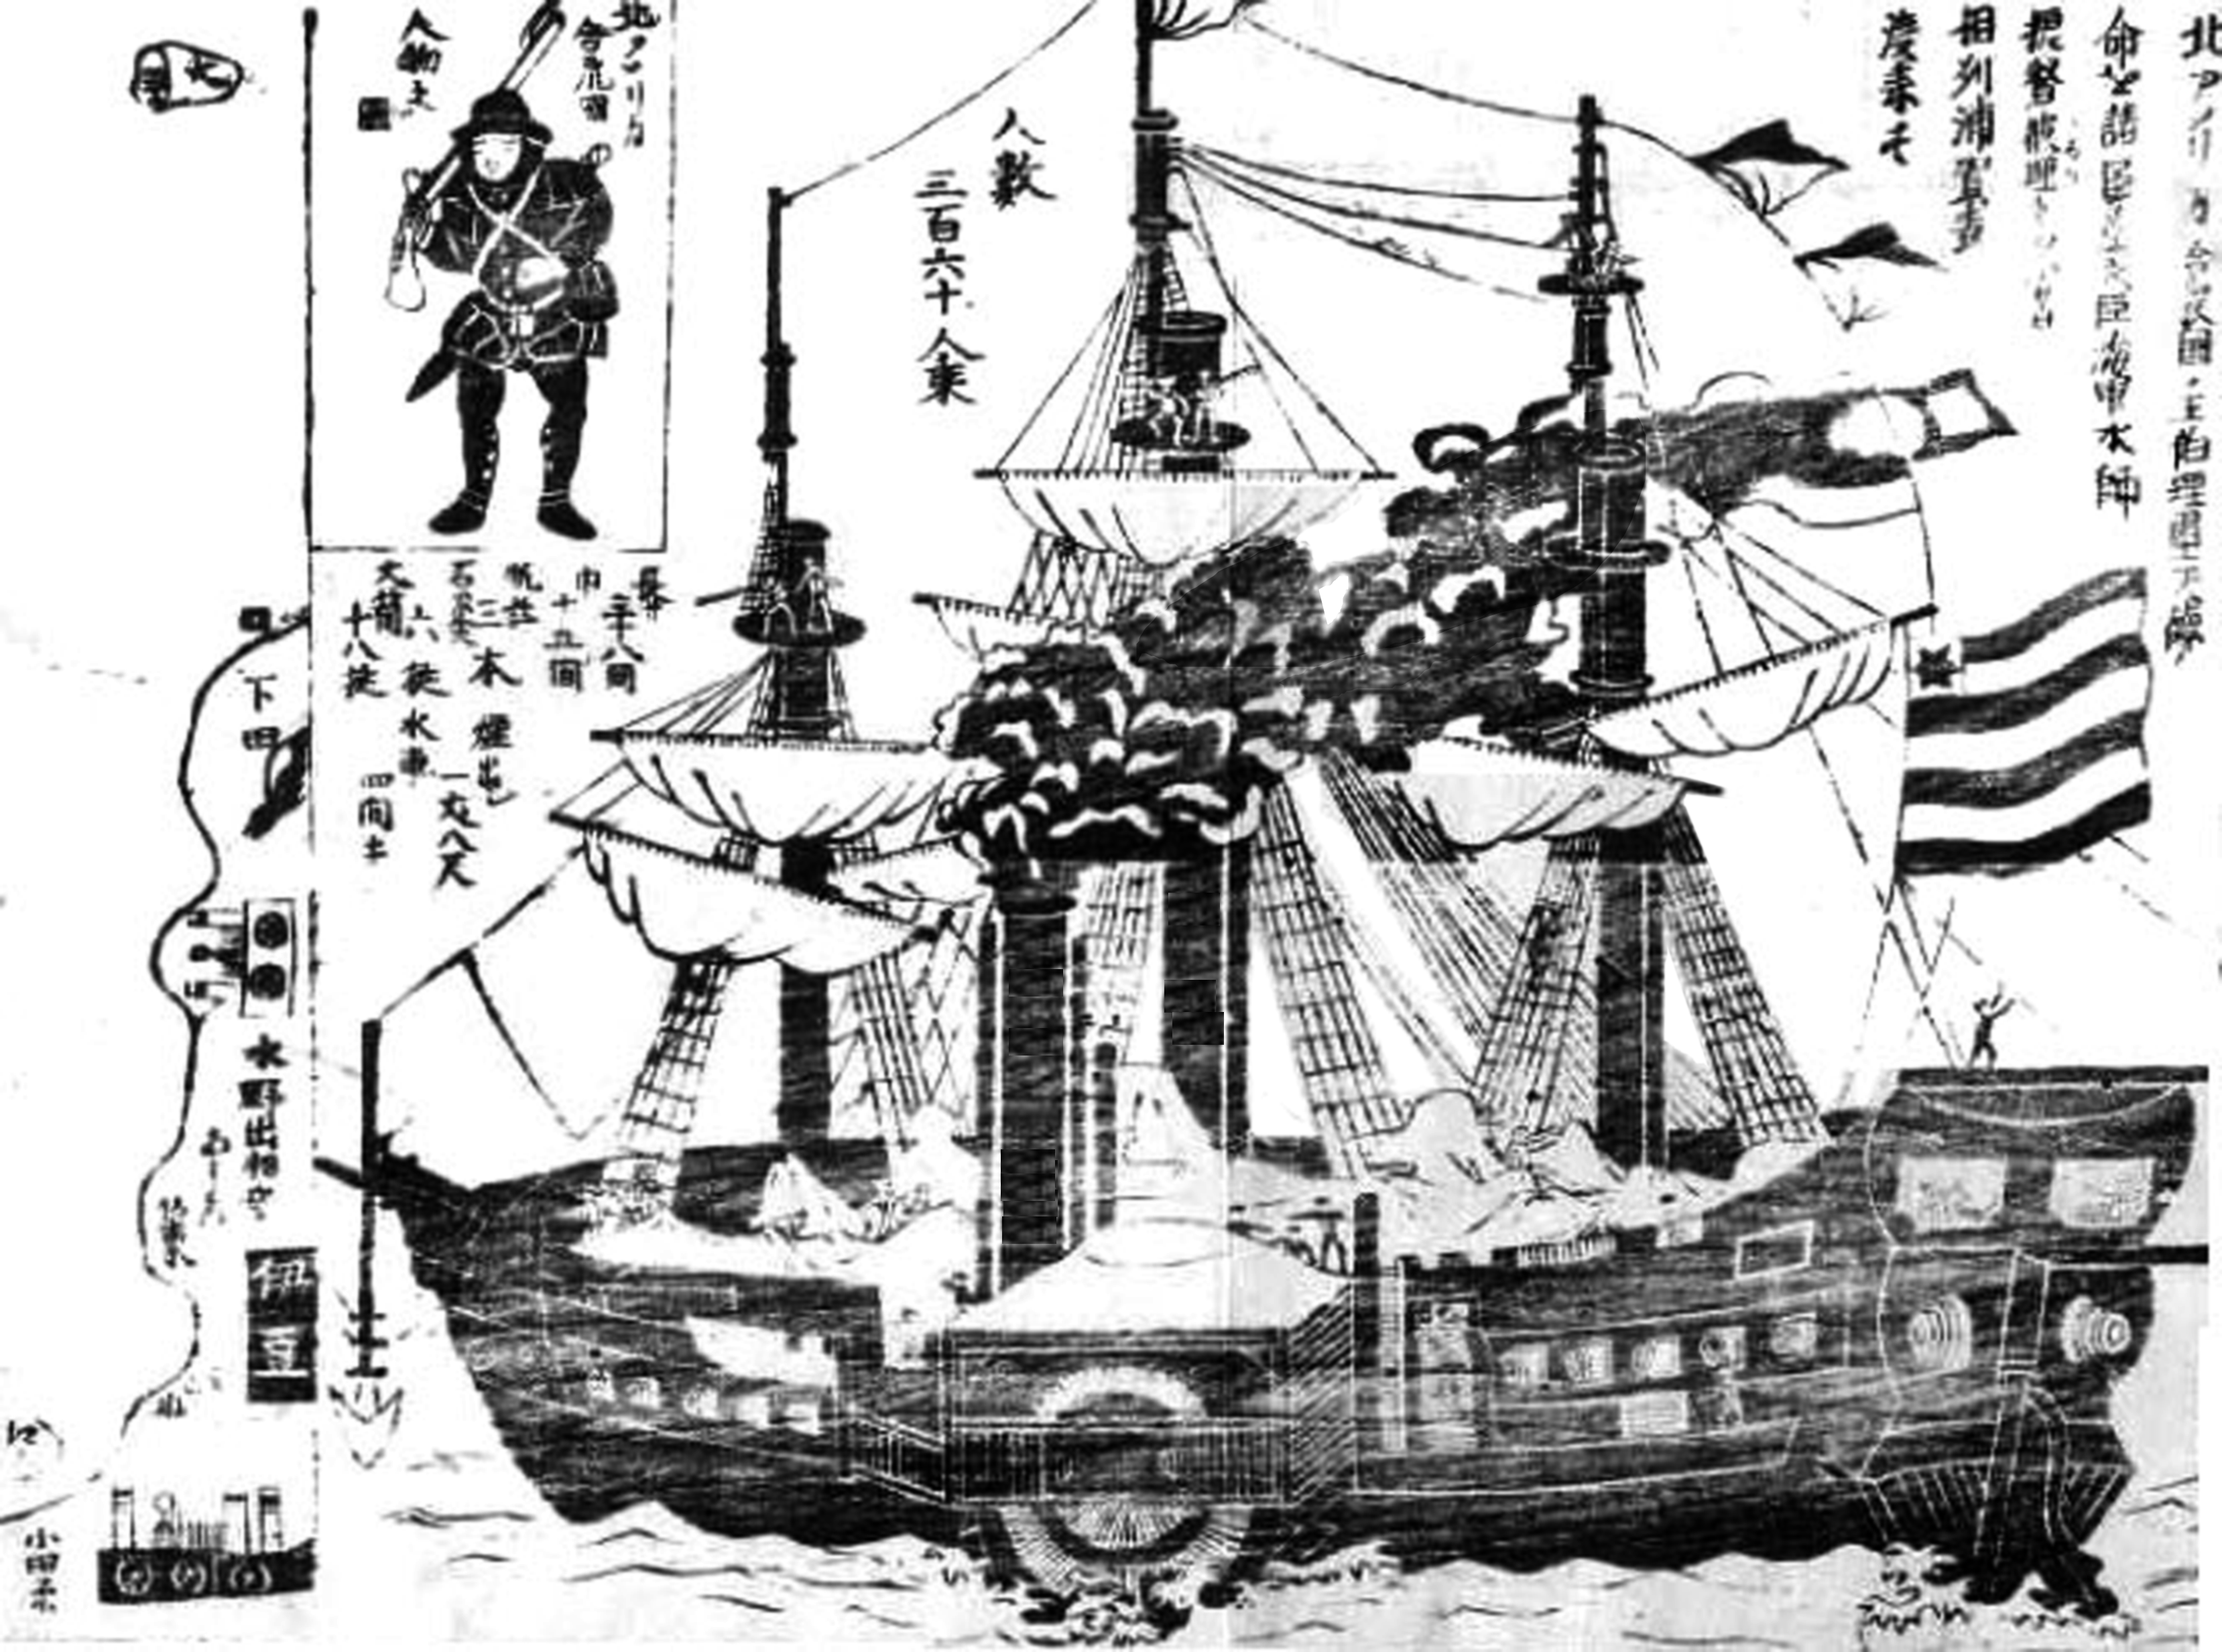 Japanese_1854_print_Commodore_Perry-1